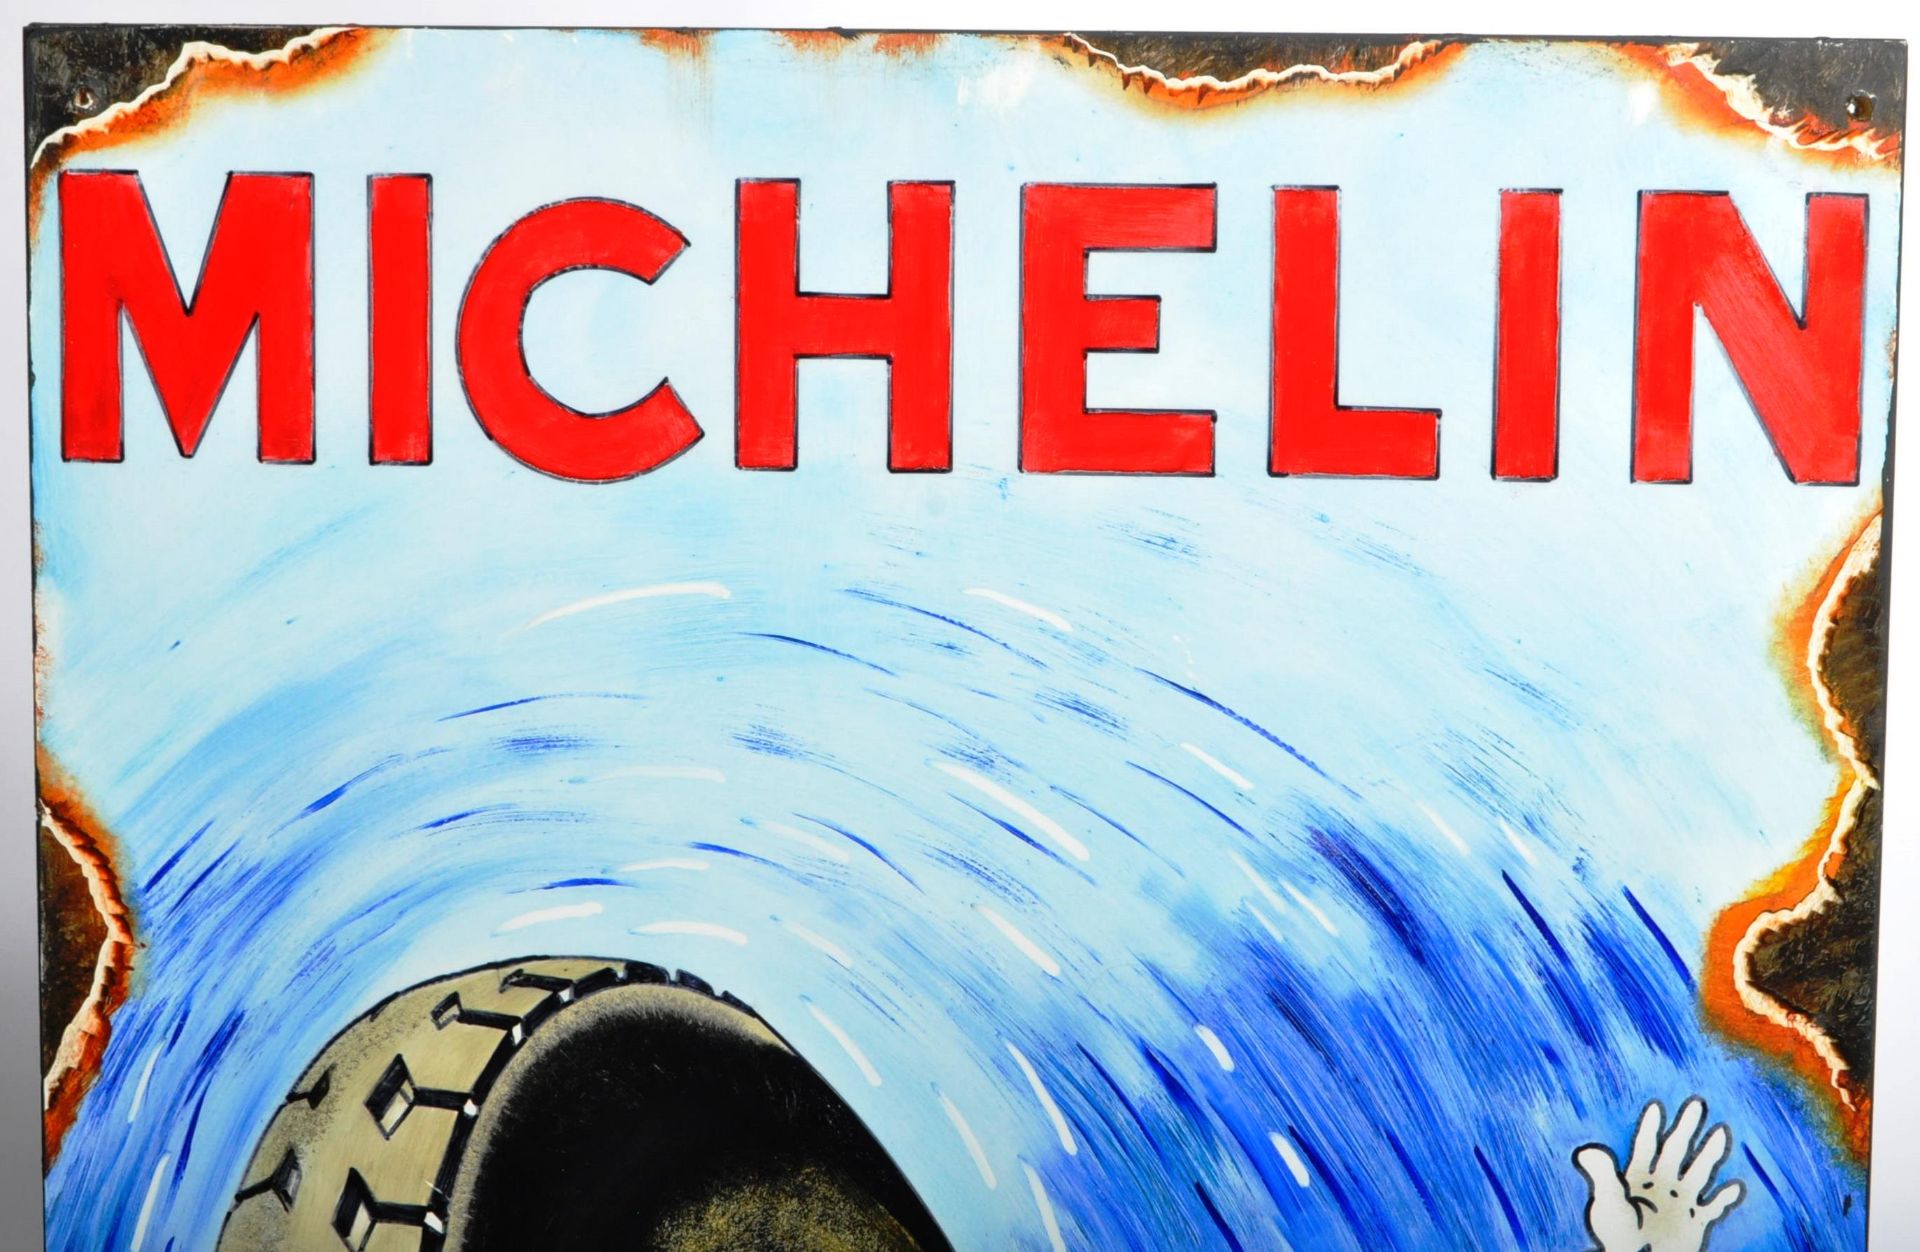 MICHELIN - ARTIST'S IMPRESSION OF A TRADITIONAL ENAMEL SIGN - Image 2 of 4